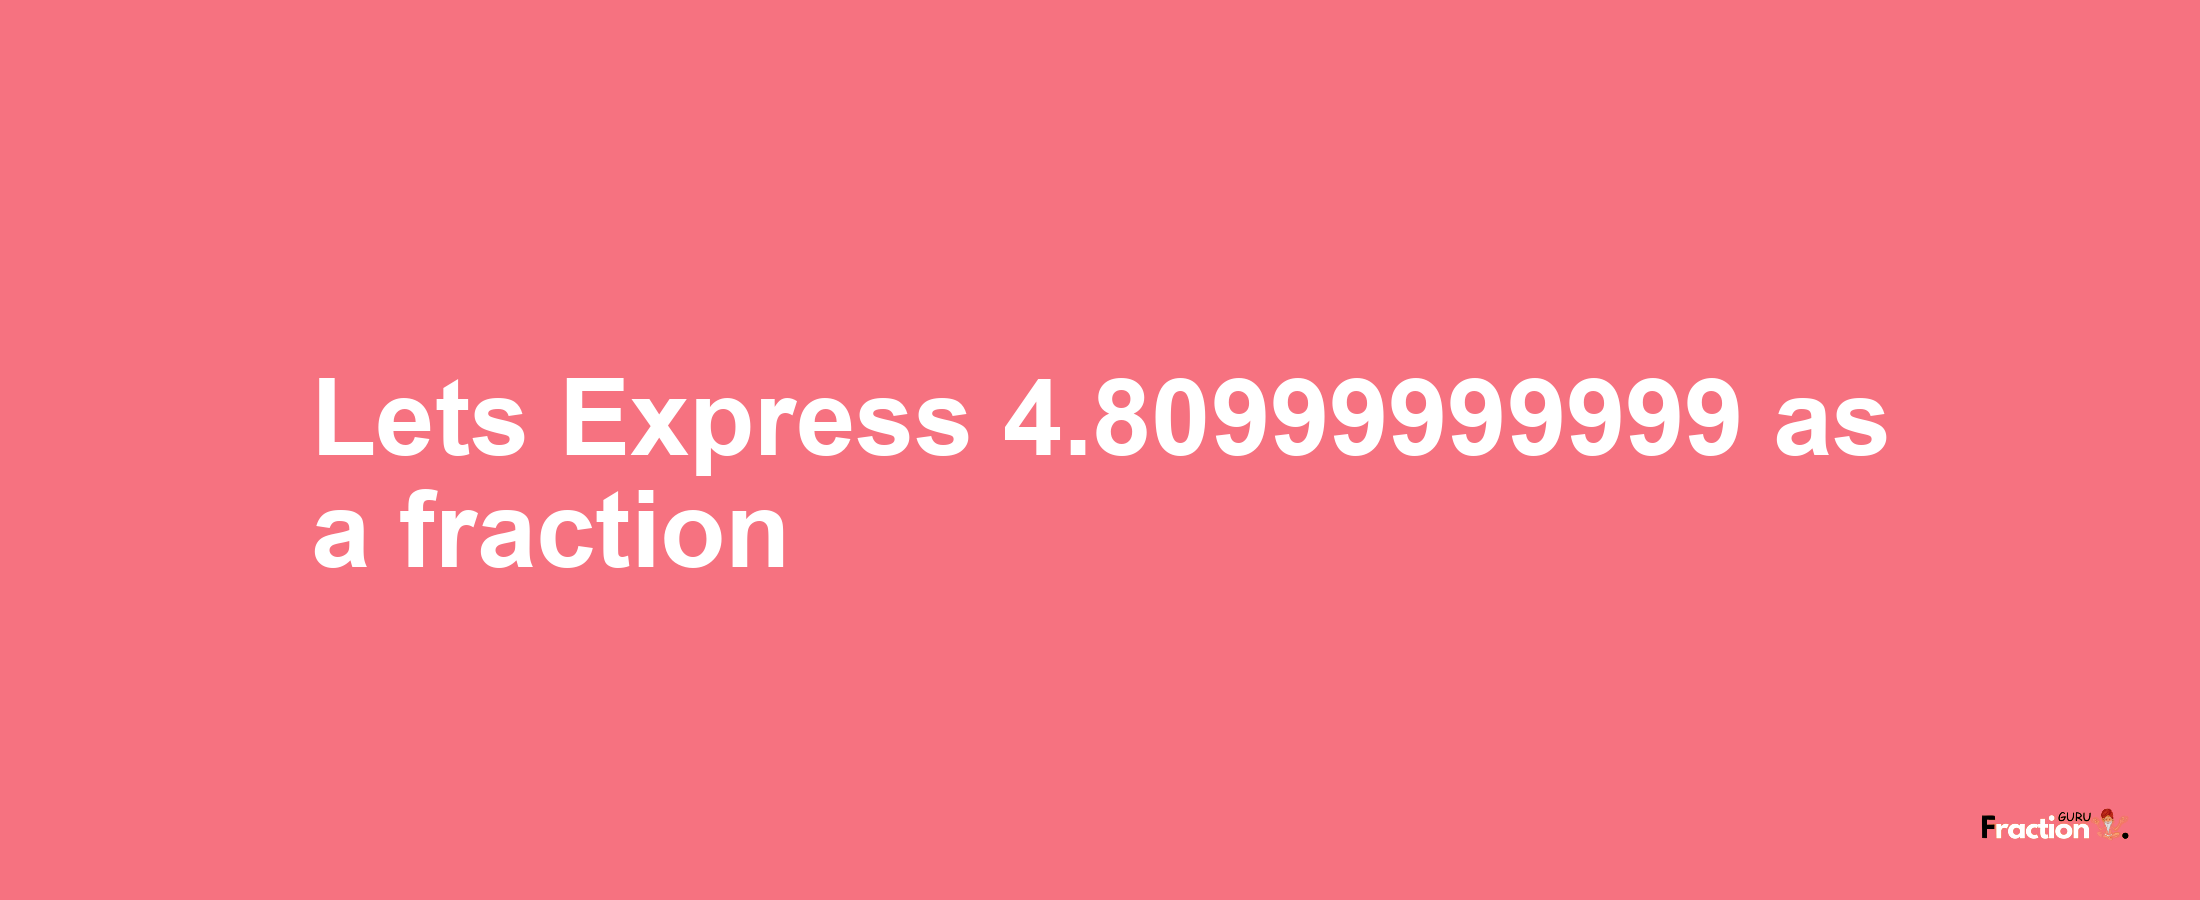 Lets Express 4.80999999999 as afraction